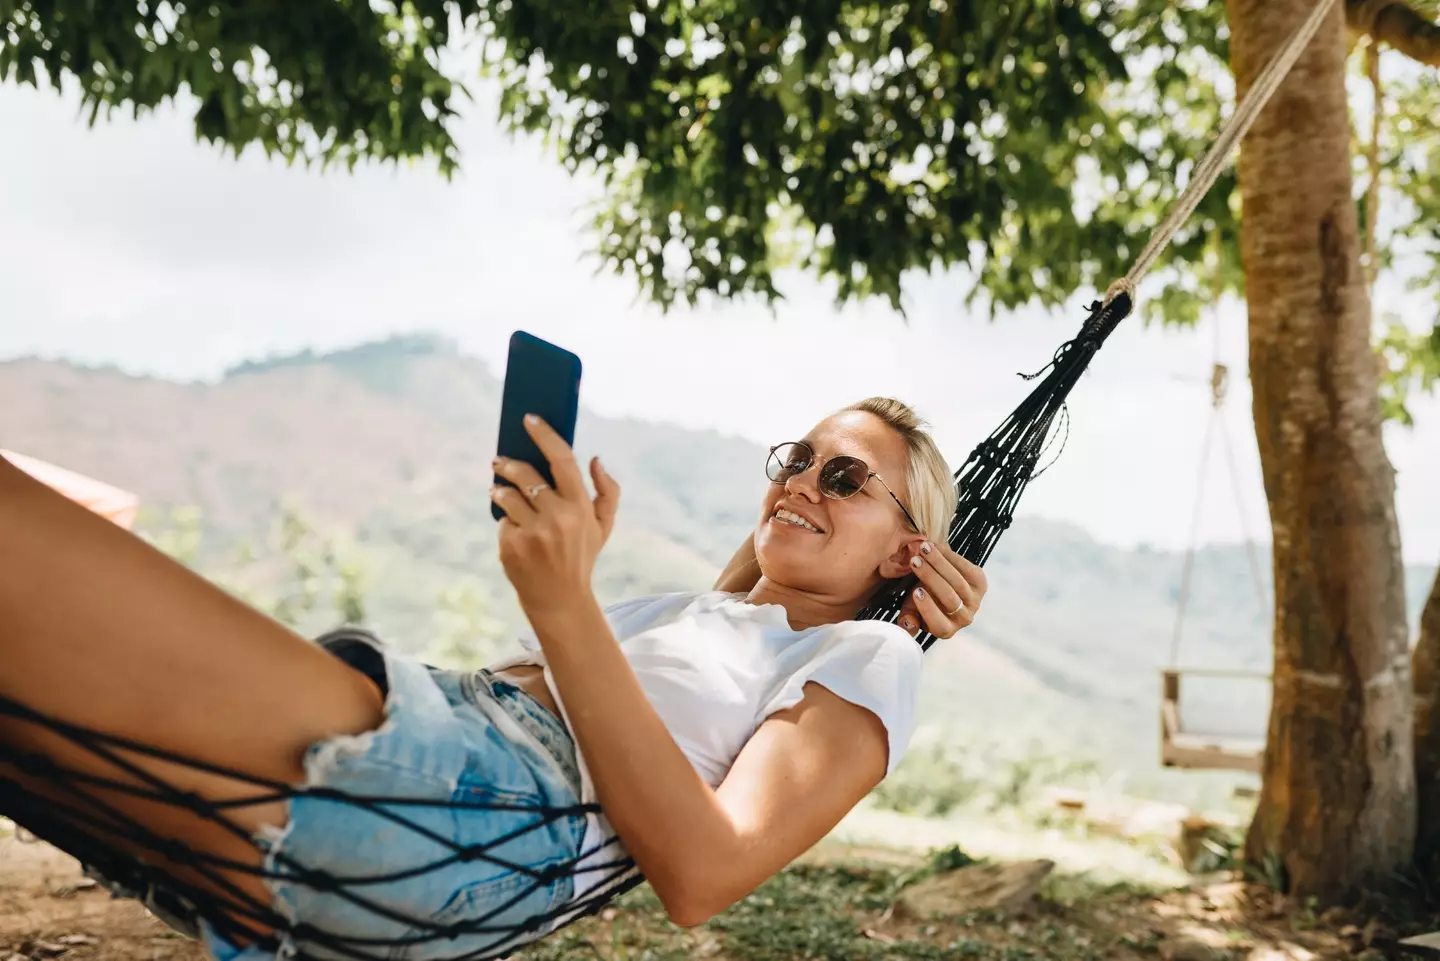 The new data roaming rule will come into play later this year.